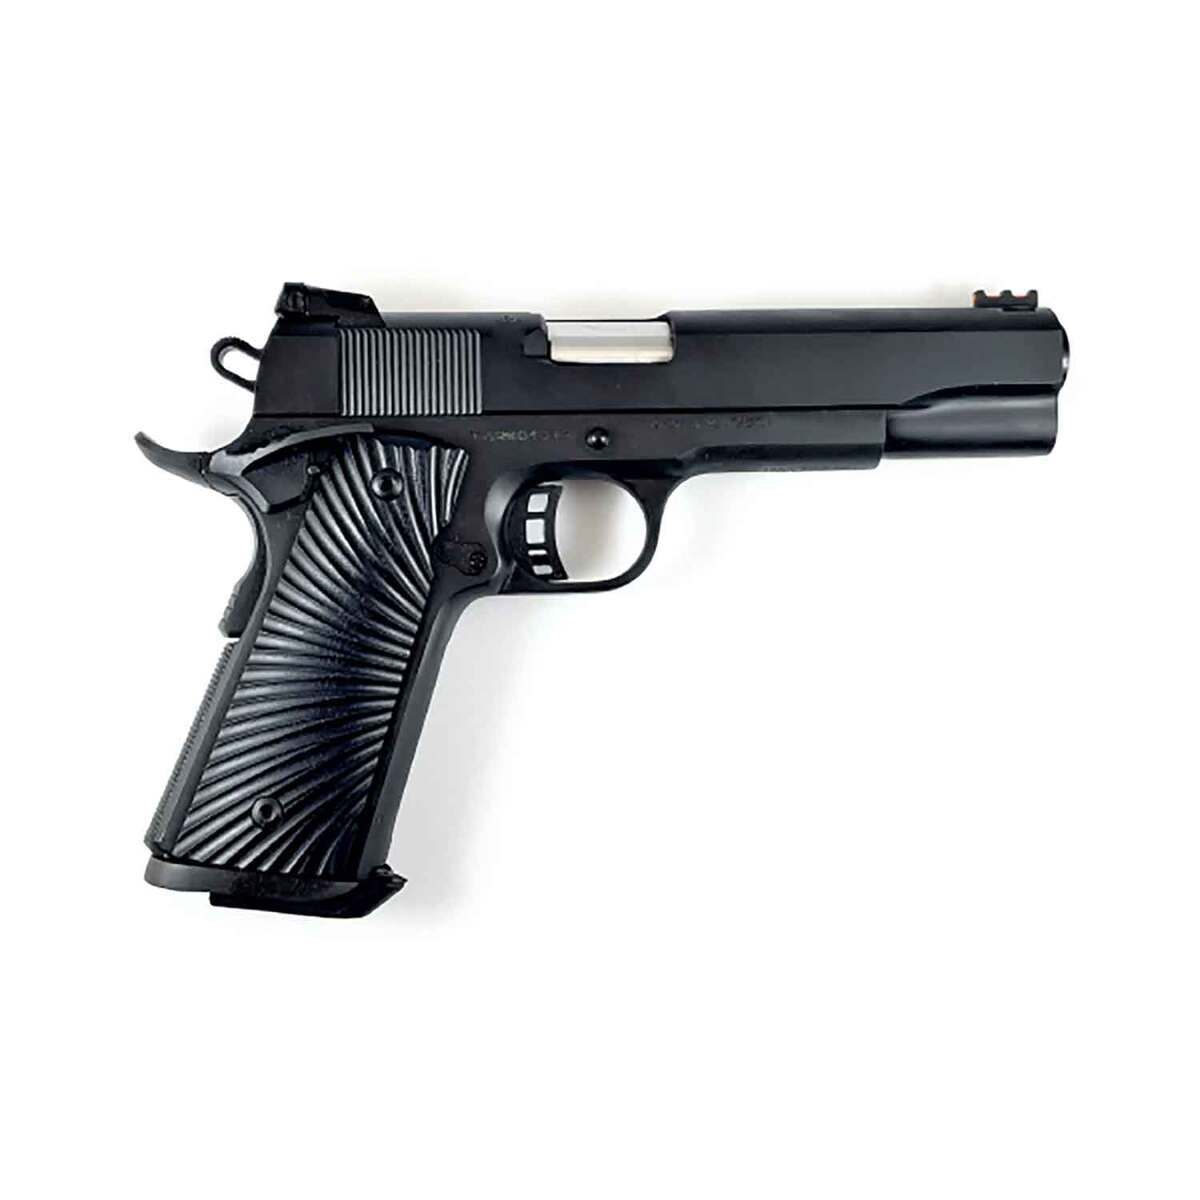 Taylor's & Company Tactical 1911 10mm Auto 5in Parkerized Finish Pistol - 8+1 Rounds